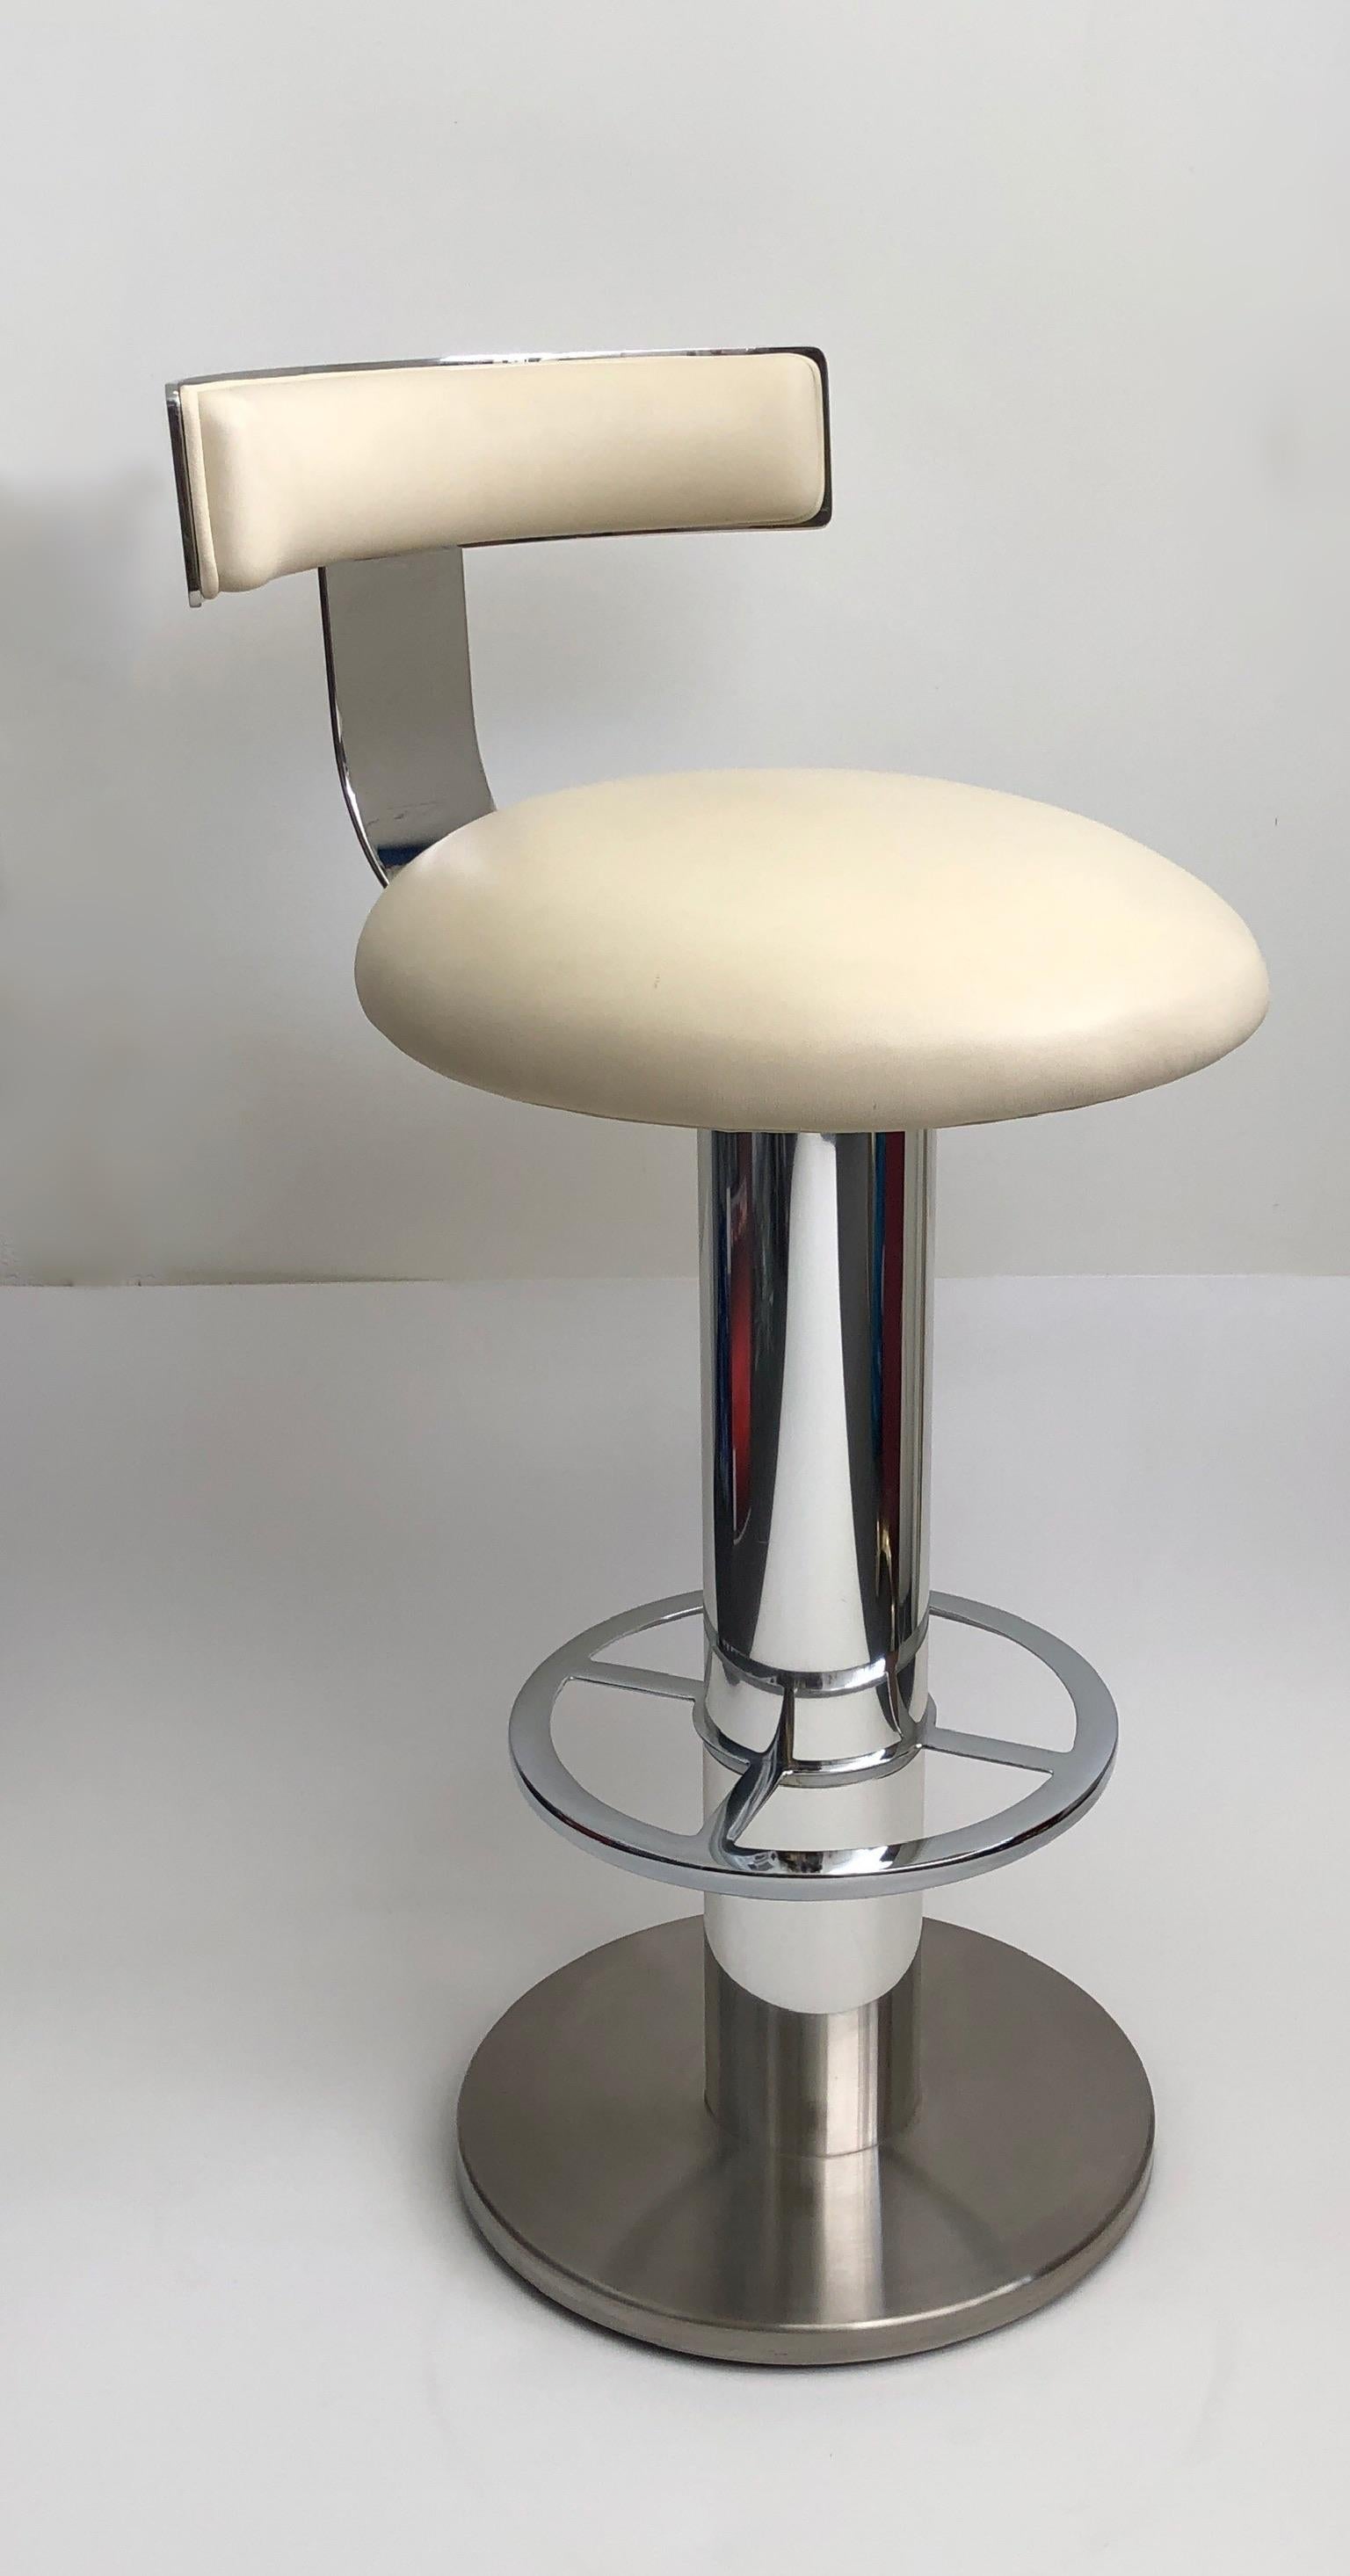 1980’s polish aluminum and off white leather swivel barstool by Design fo Leisure.
In beautiful original condition, with minor wear consistent with age. 
The frame is all polish aluminum with the exception of the round bottom base is brushed